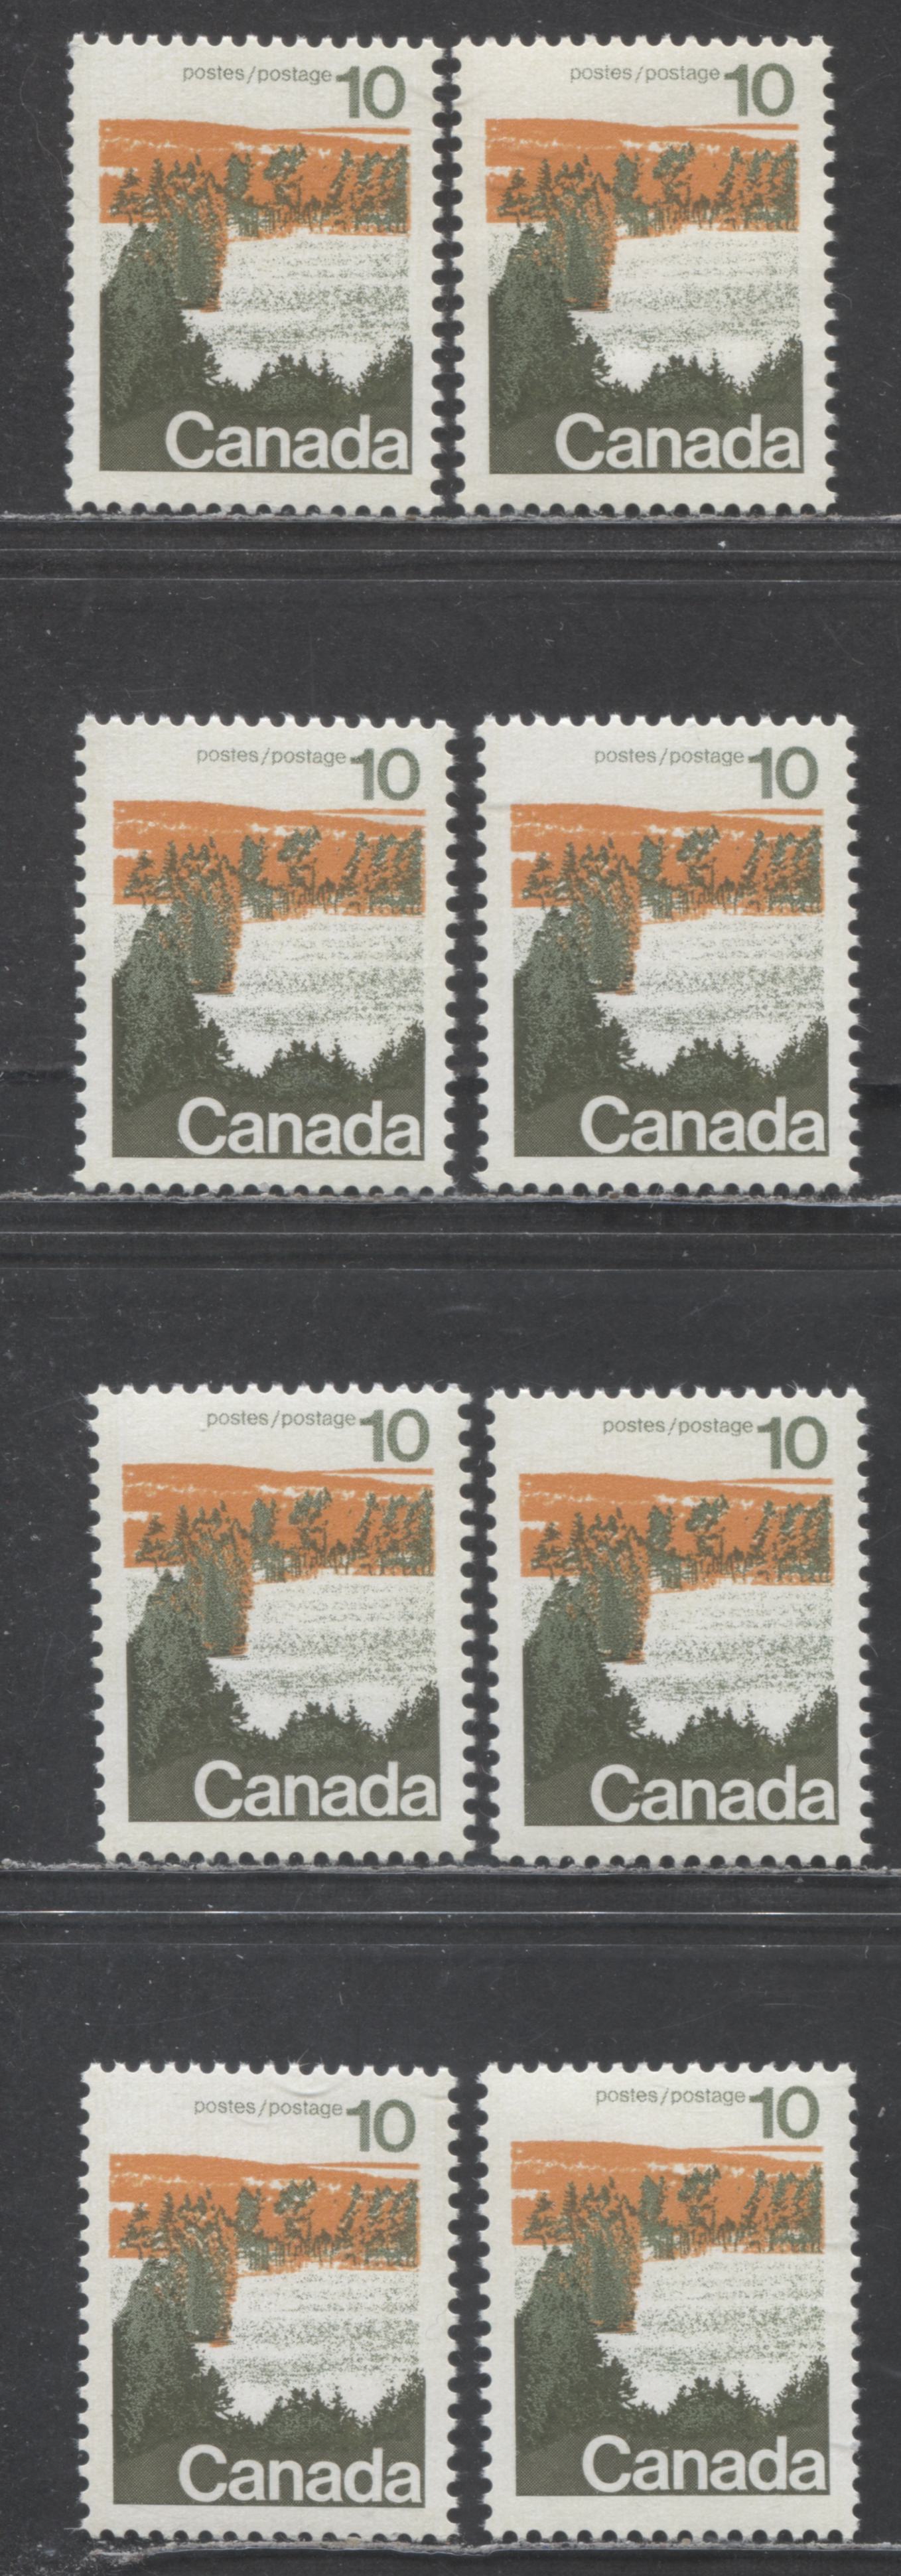 Lot 99 Canada #594 10c Multicolored Forest, 1972 Landscape Definitives, 8 VFNH and OG Singles With OP4 Tagging, Vertical Ribbed Surface Papers, Pale & Yellow Tags, Type 1 & Perf 12.5 x 12